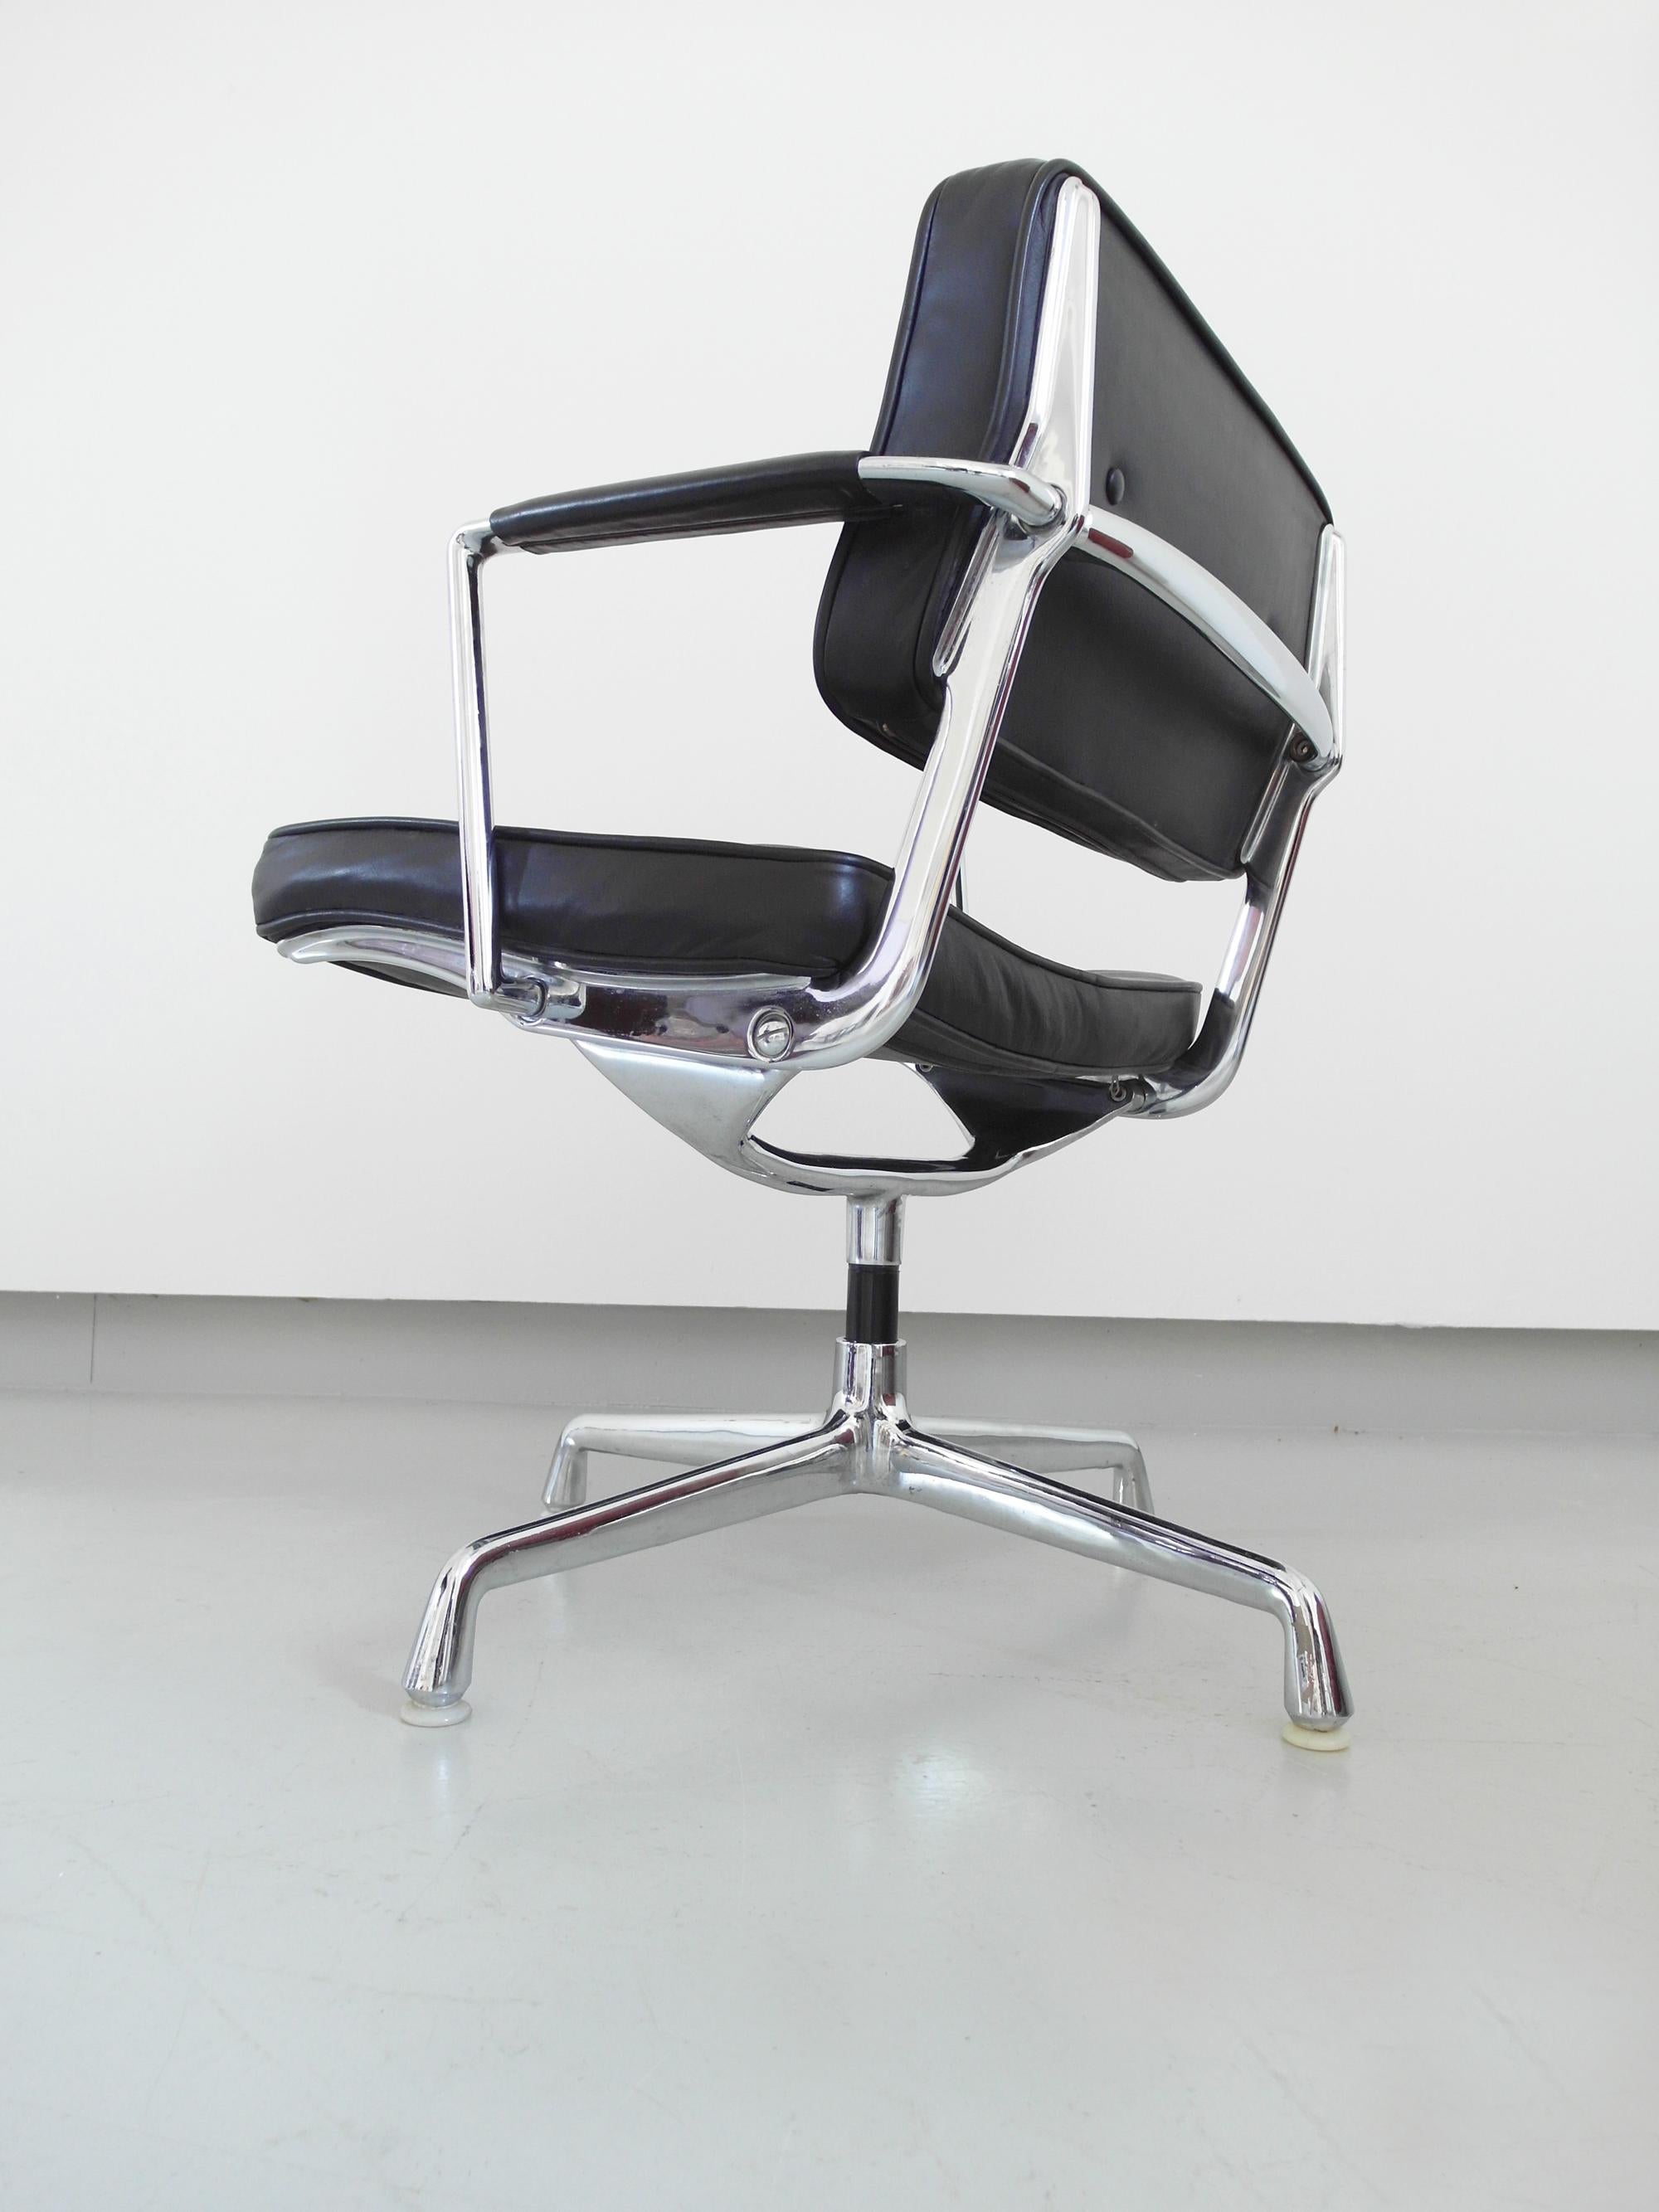 Eames Intermediate chair, early Fehlbaum production for Herman Miller, 1968-1973 9